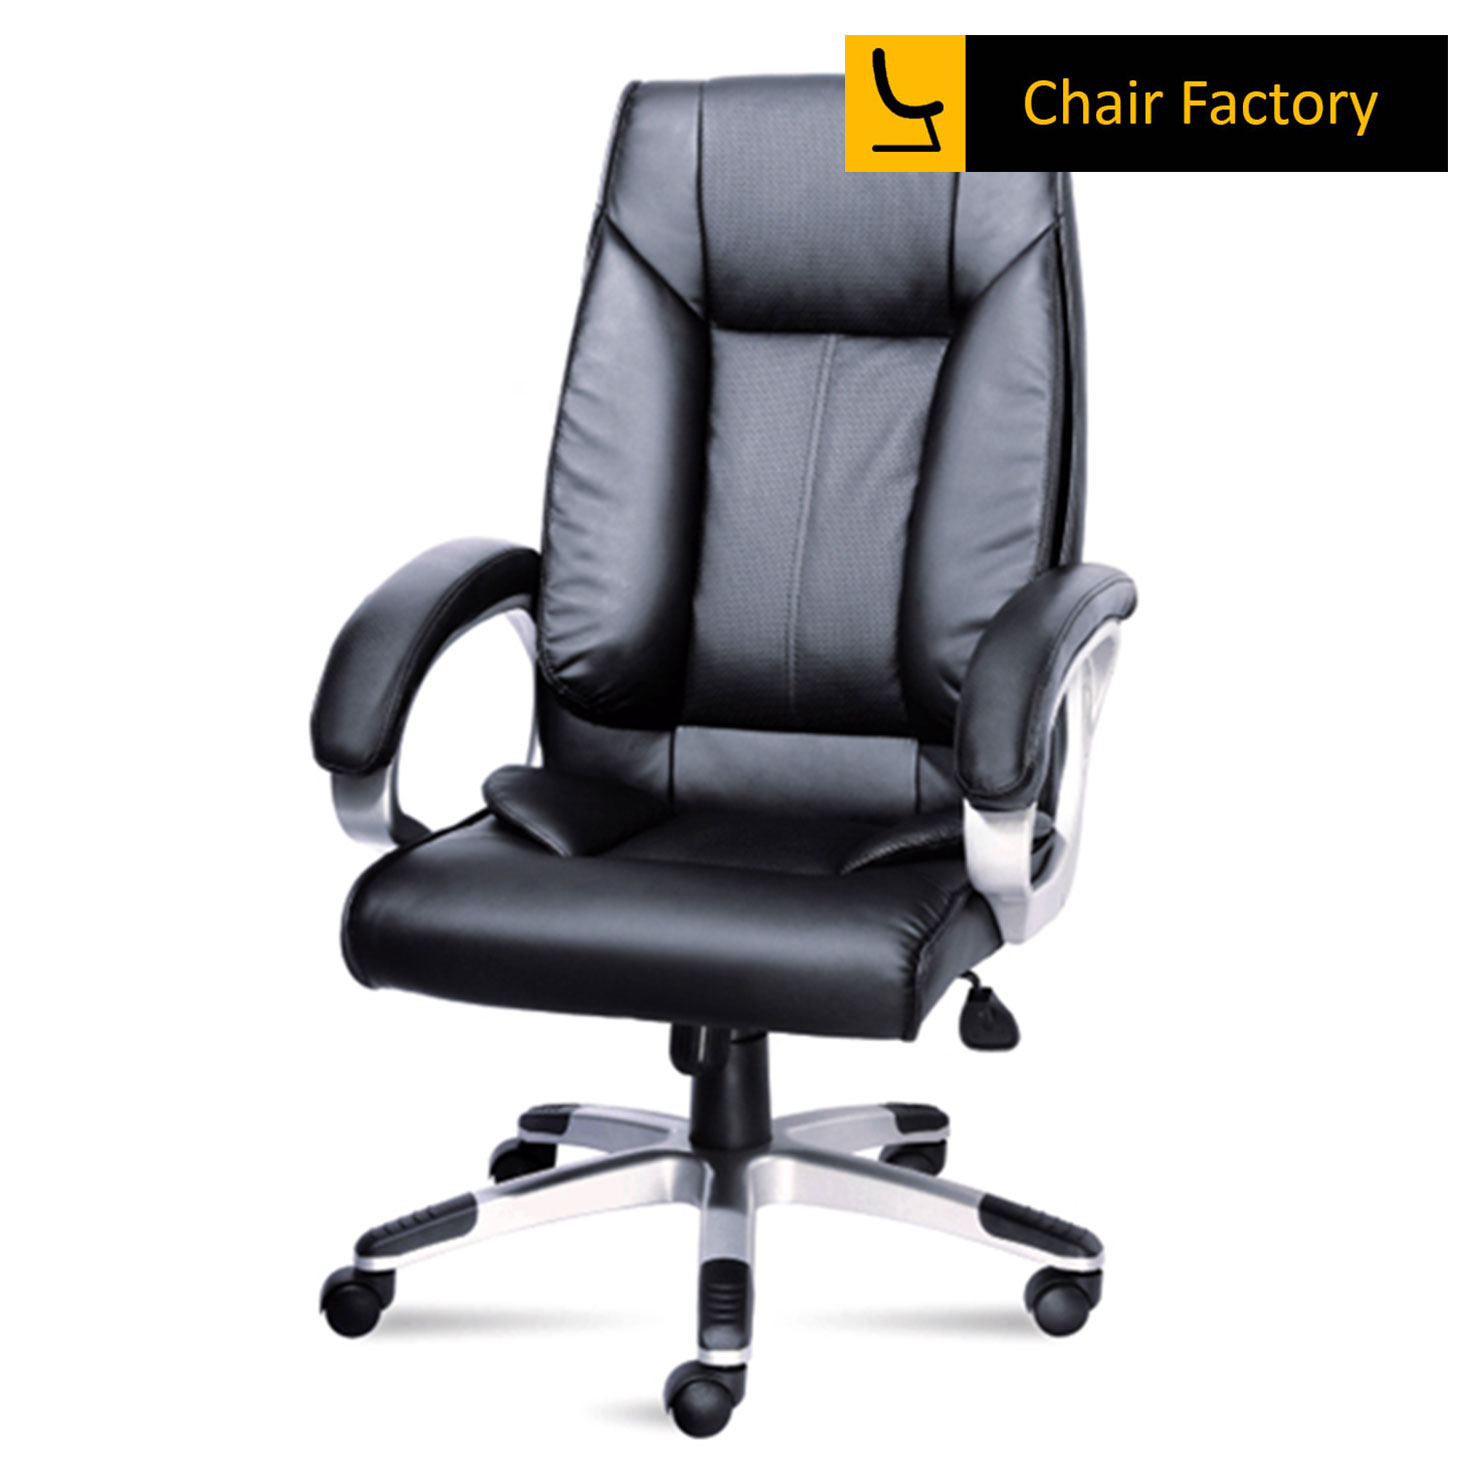 Leontine conference room leather Chair